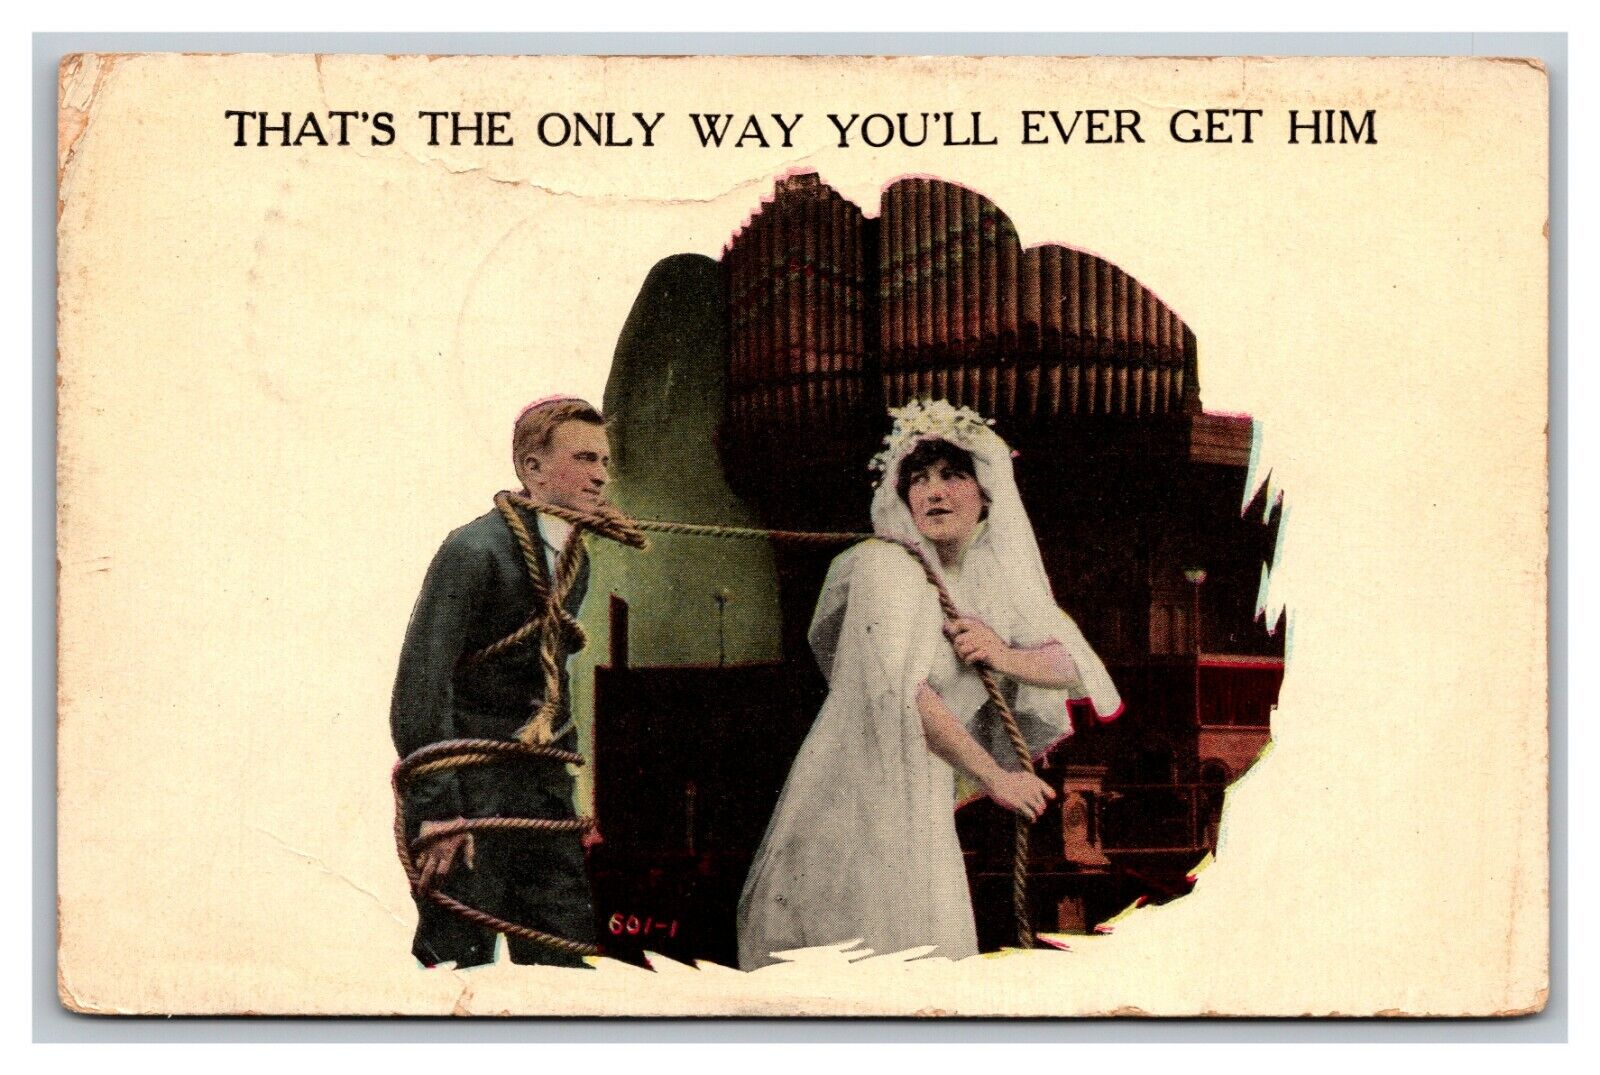 Vintage 1915 Humor Postcard Bride Dragging Groom to the Altar with Rope FUNNY